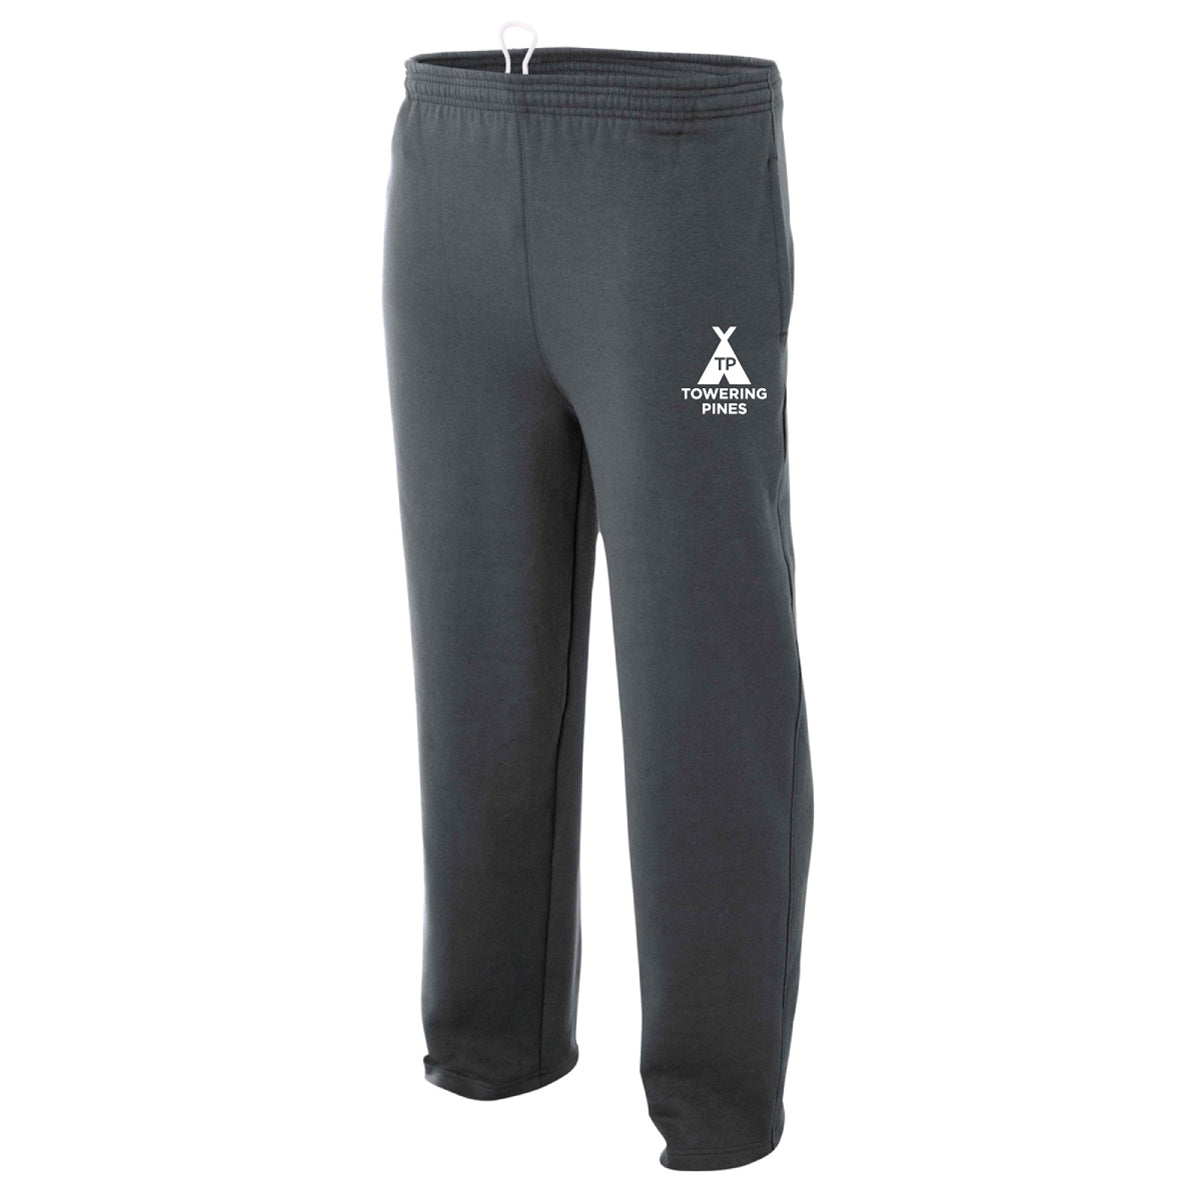 Towering Pines Camp Open Bottom Performance Sweatpants